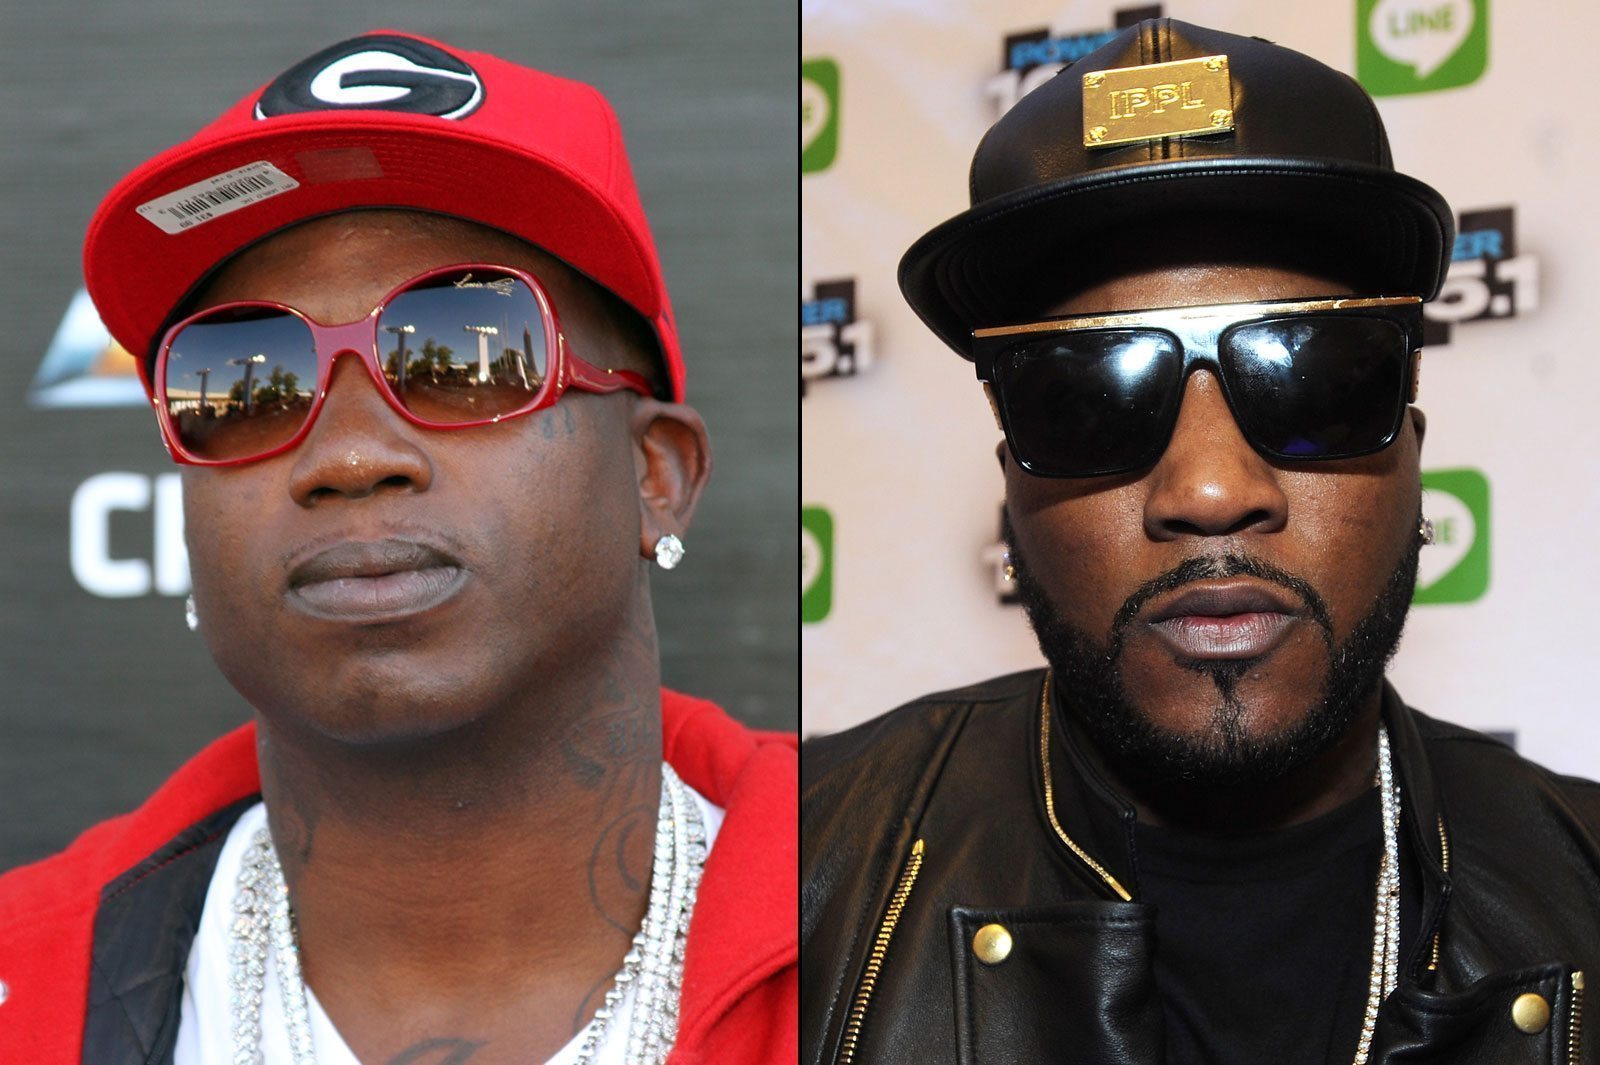 The Young Jeezy and Gucci Mane Beef